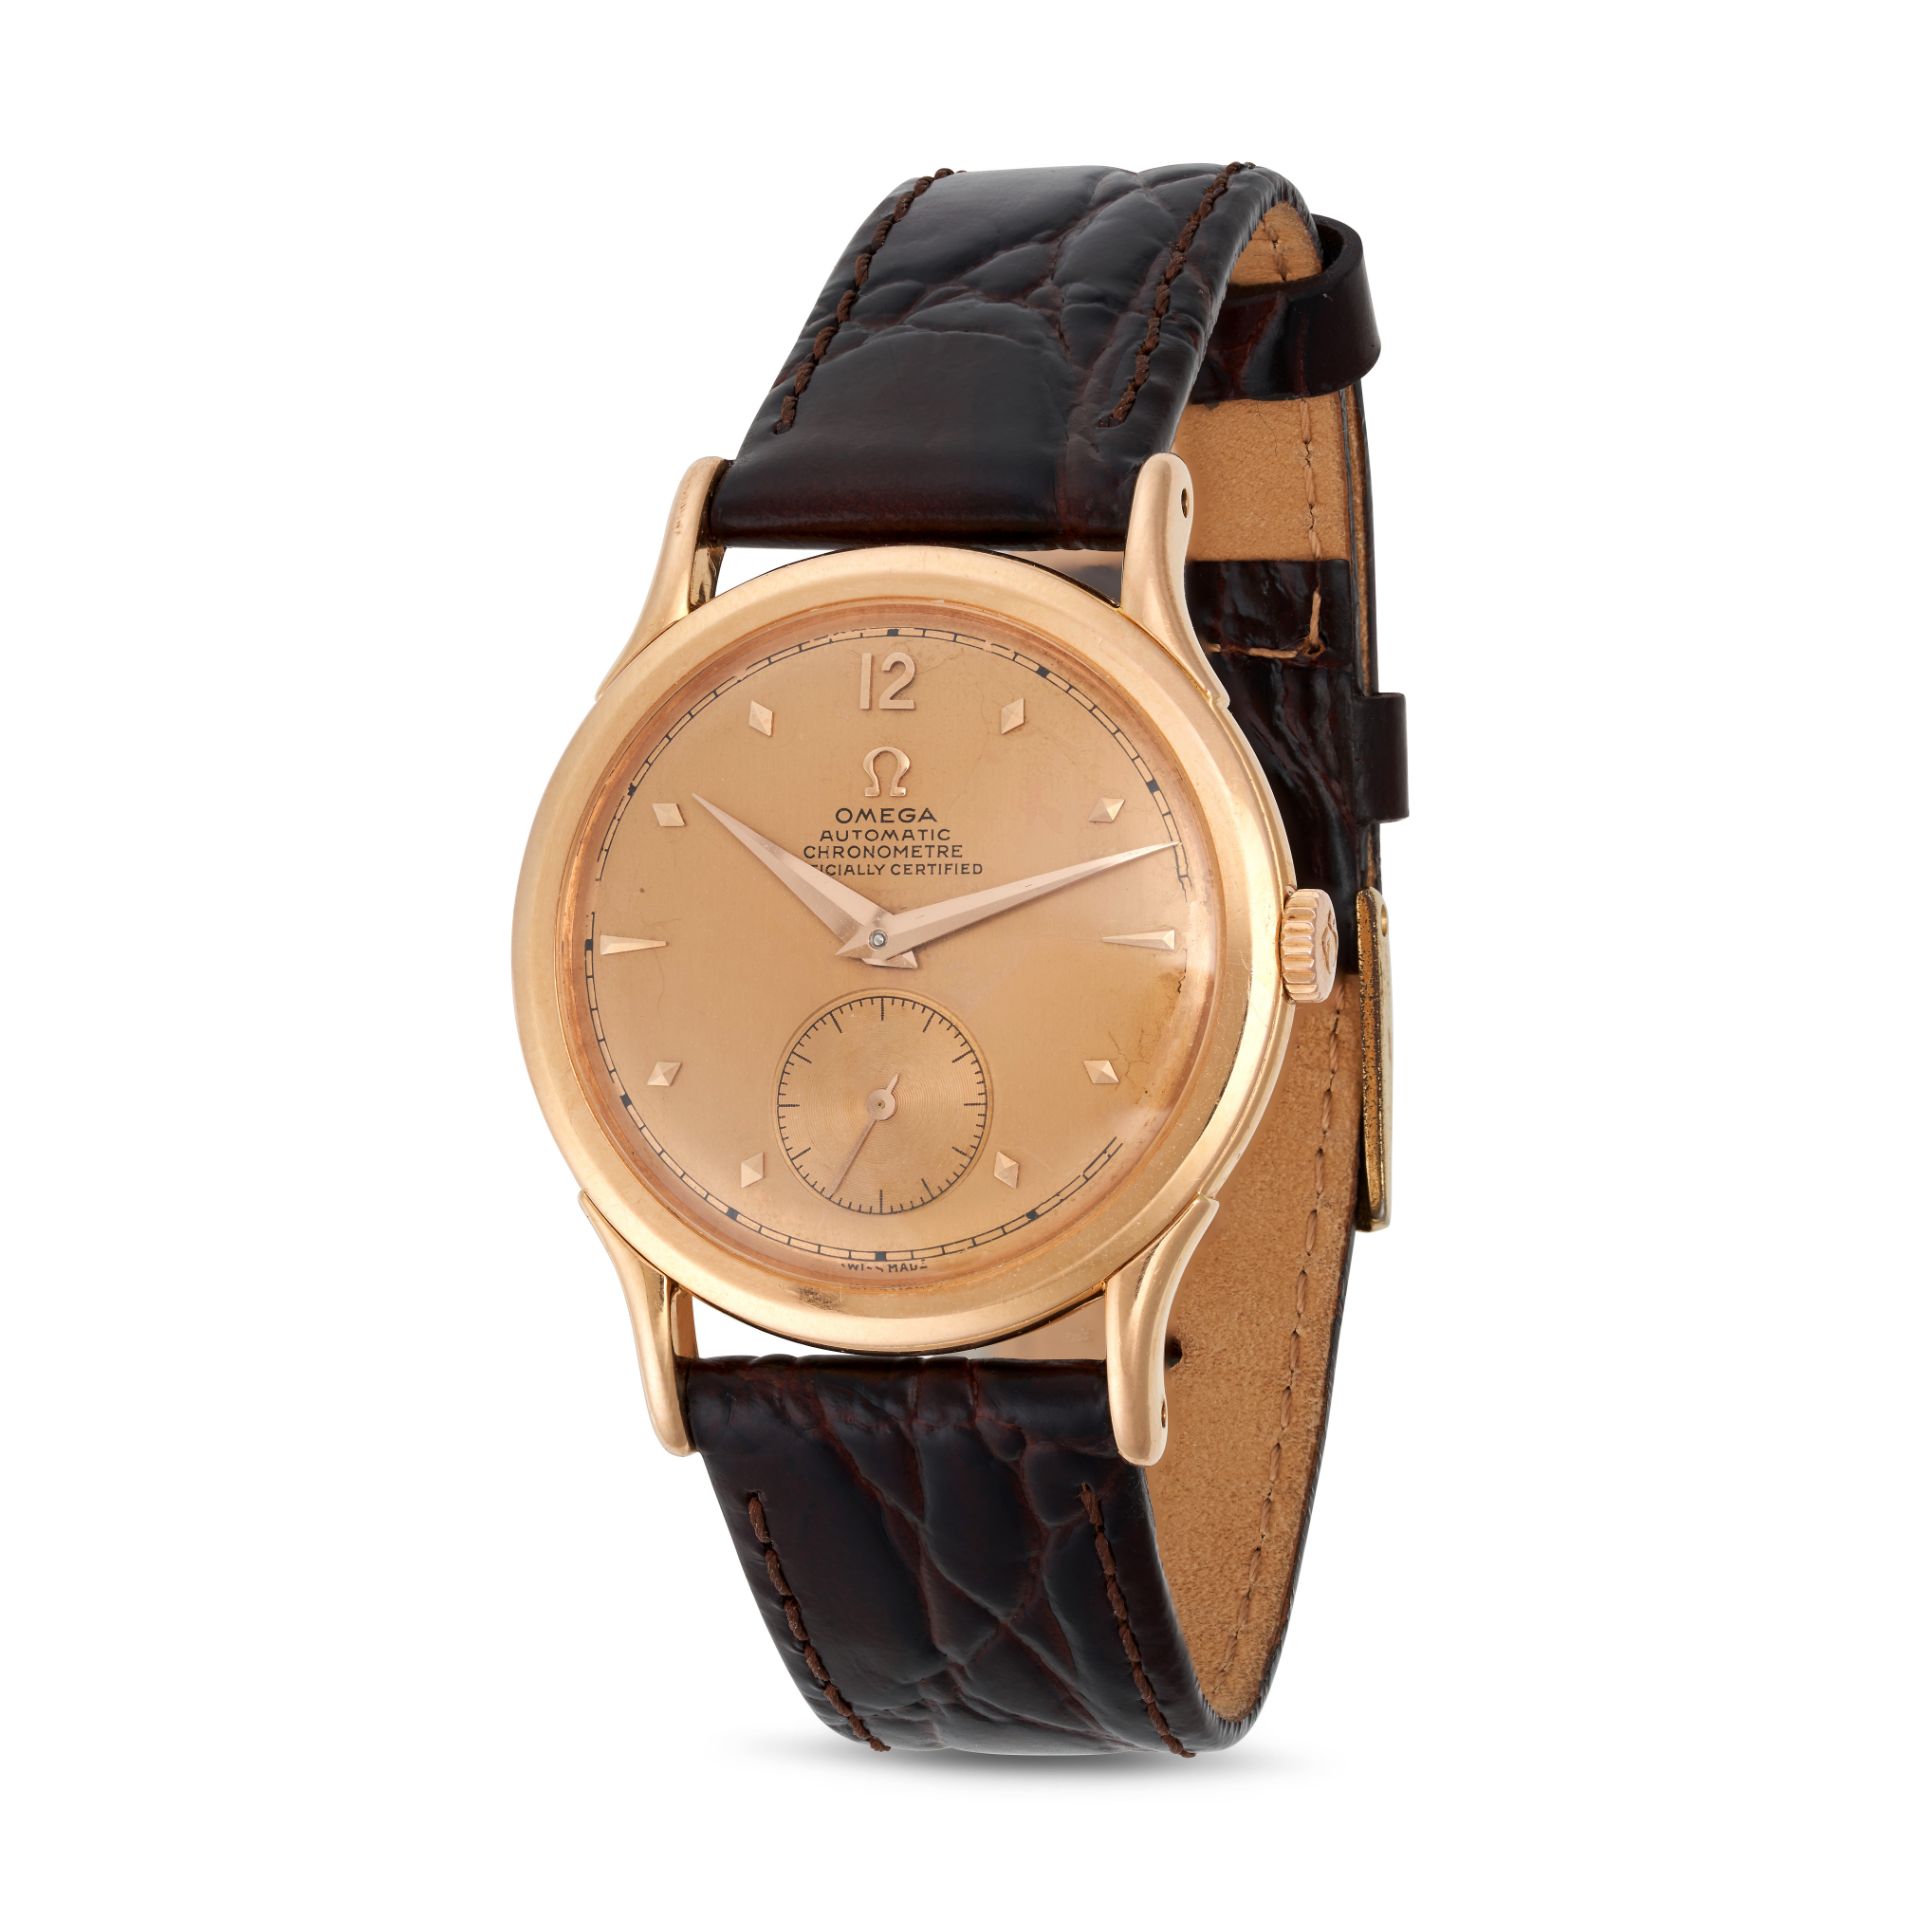 OMEGA - A VINTAGE OMEGA CENTENARY AUTOMATIC WRISTWATCH in 18ct rose gold, 2499, c.1950s, 17 jewel...